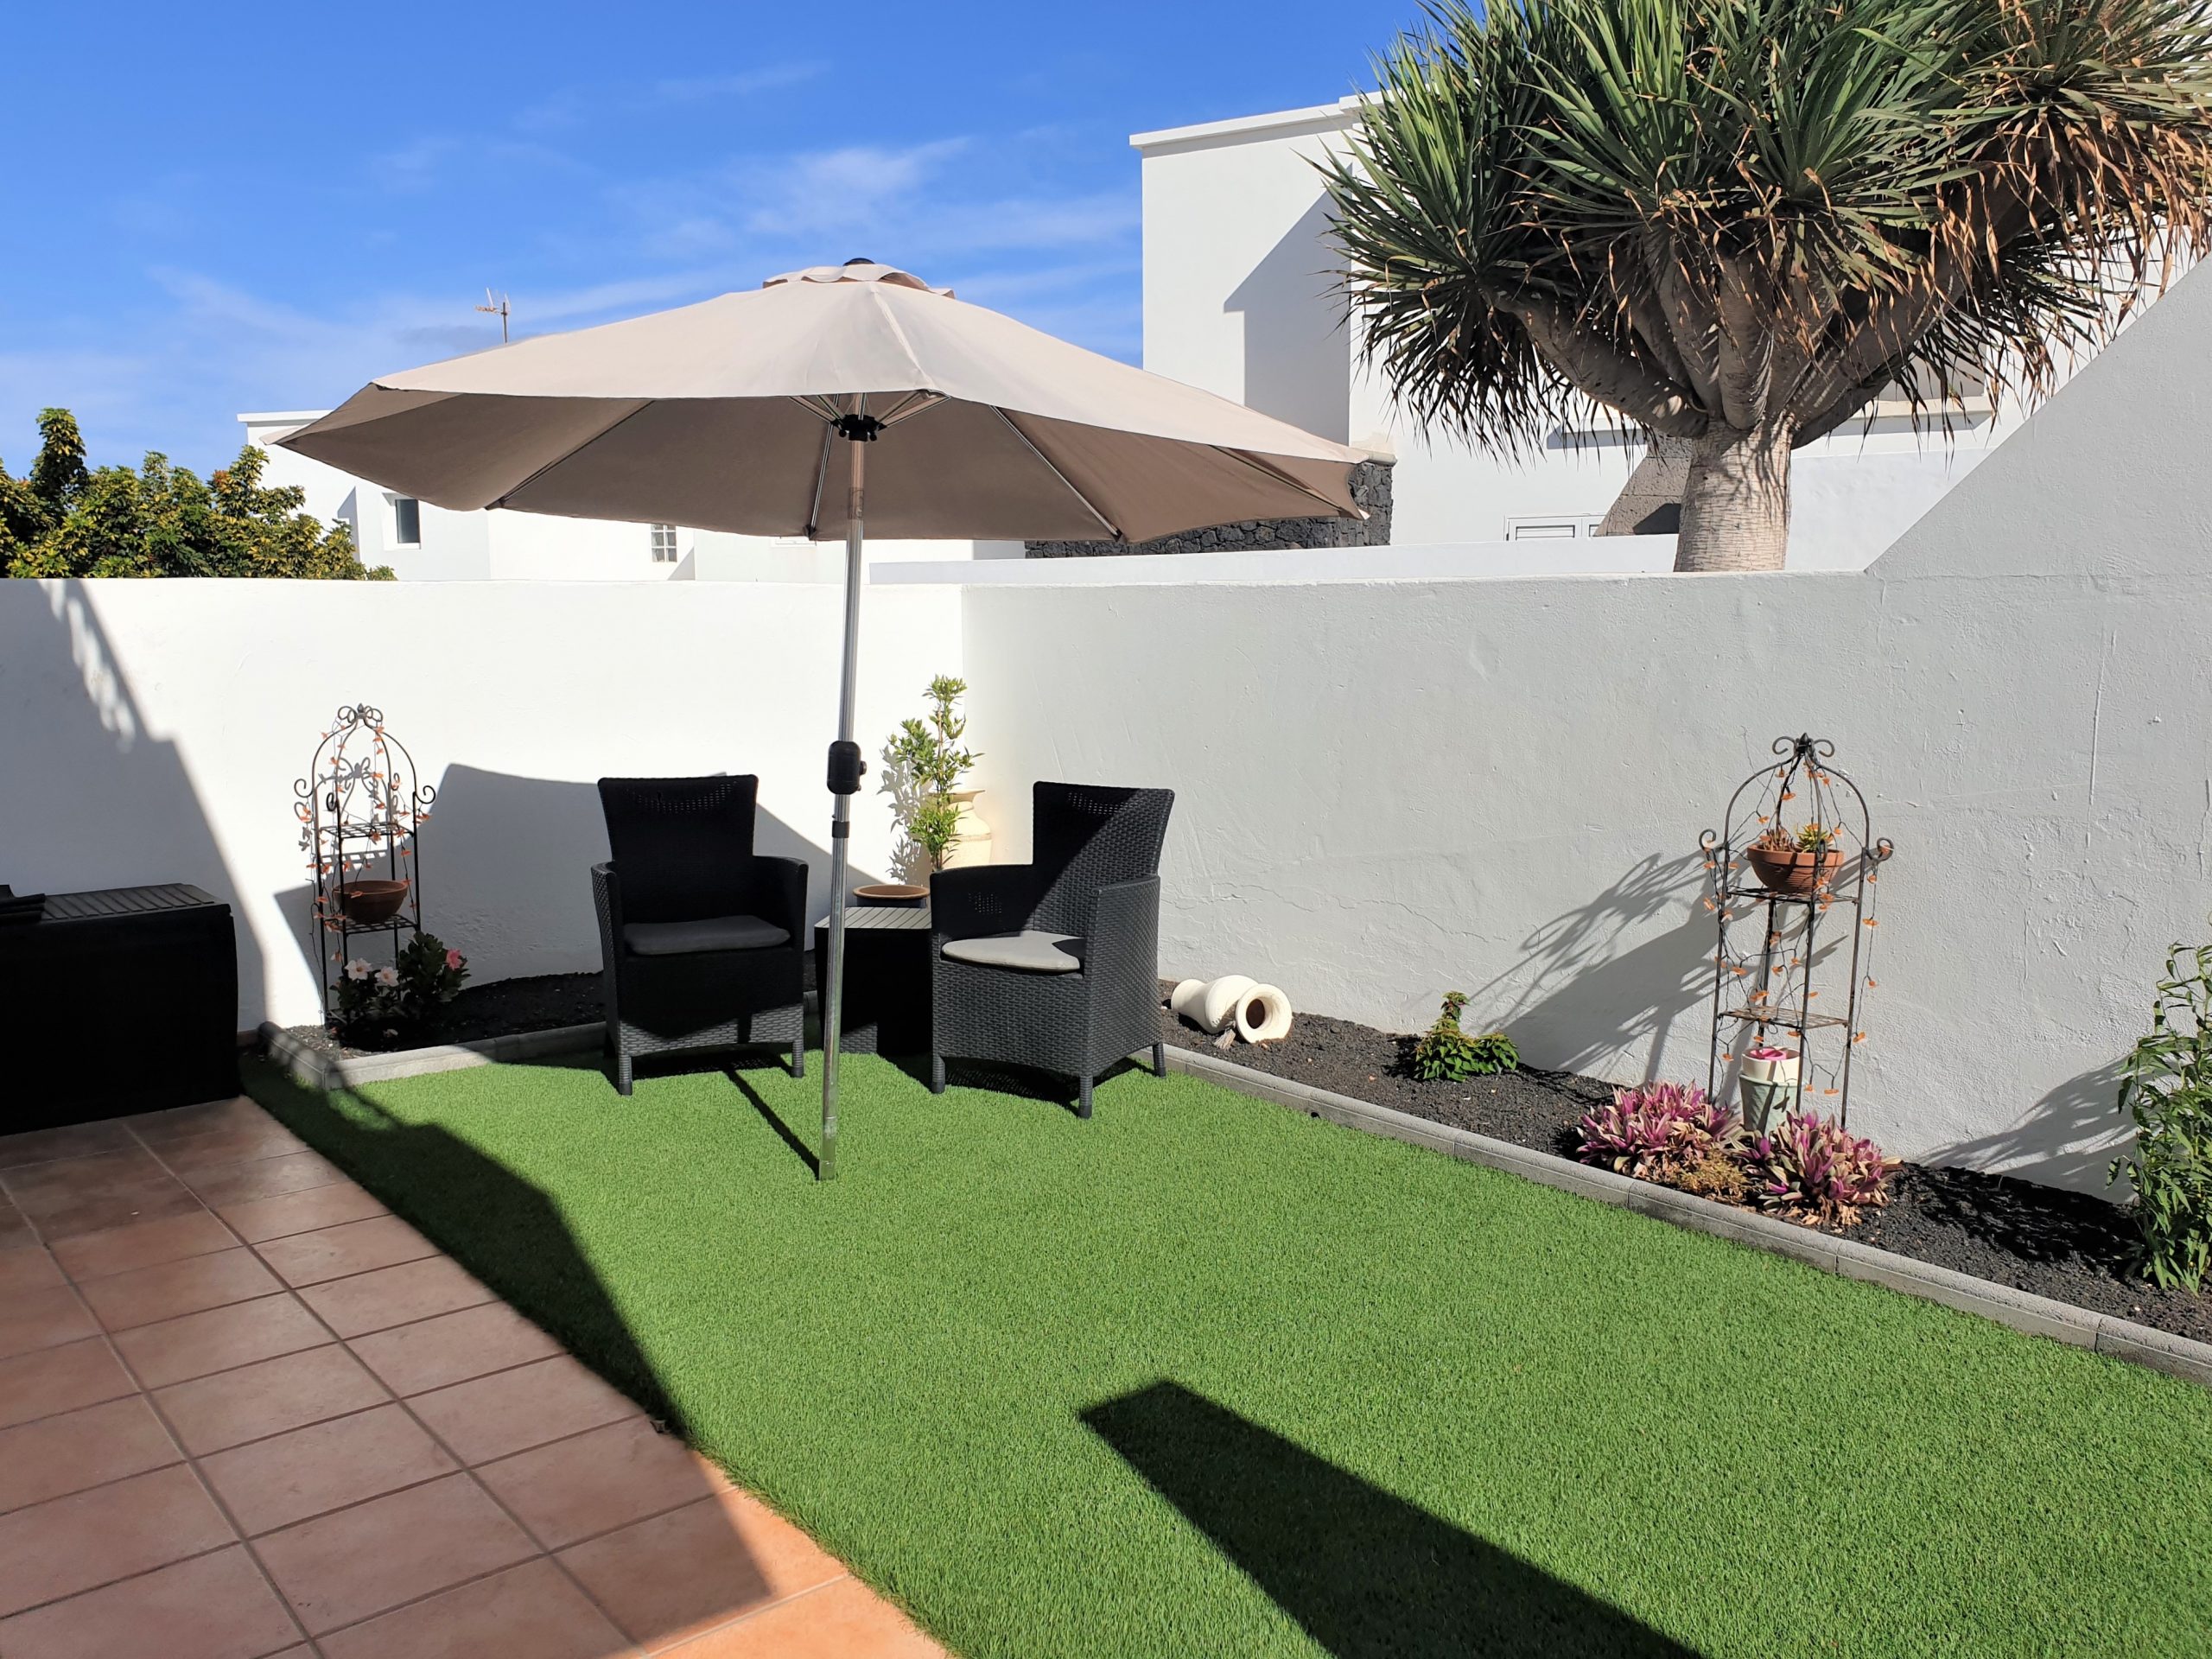 Immaculate Detached 3 Bedroom Villa for sale in Lanzarote, Tias with Panoramic Sea and Mountain Views, Ready to Move In